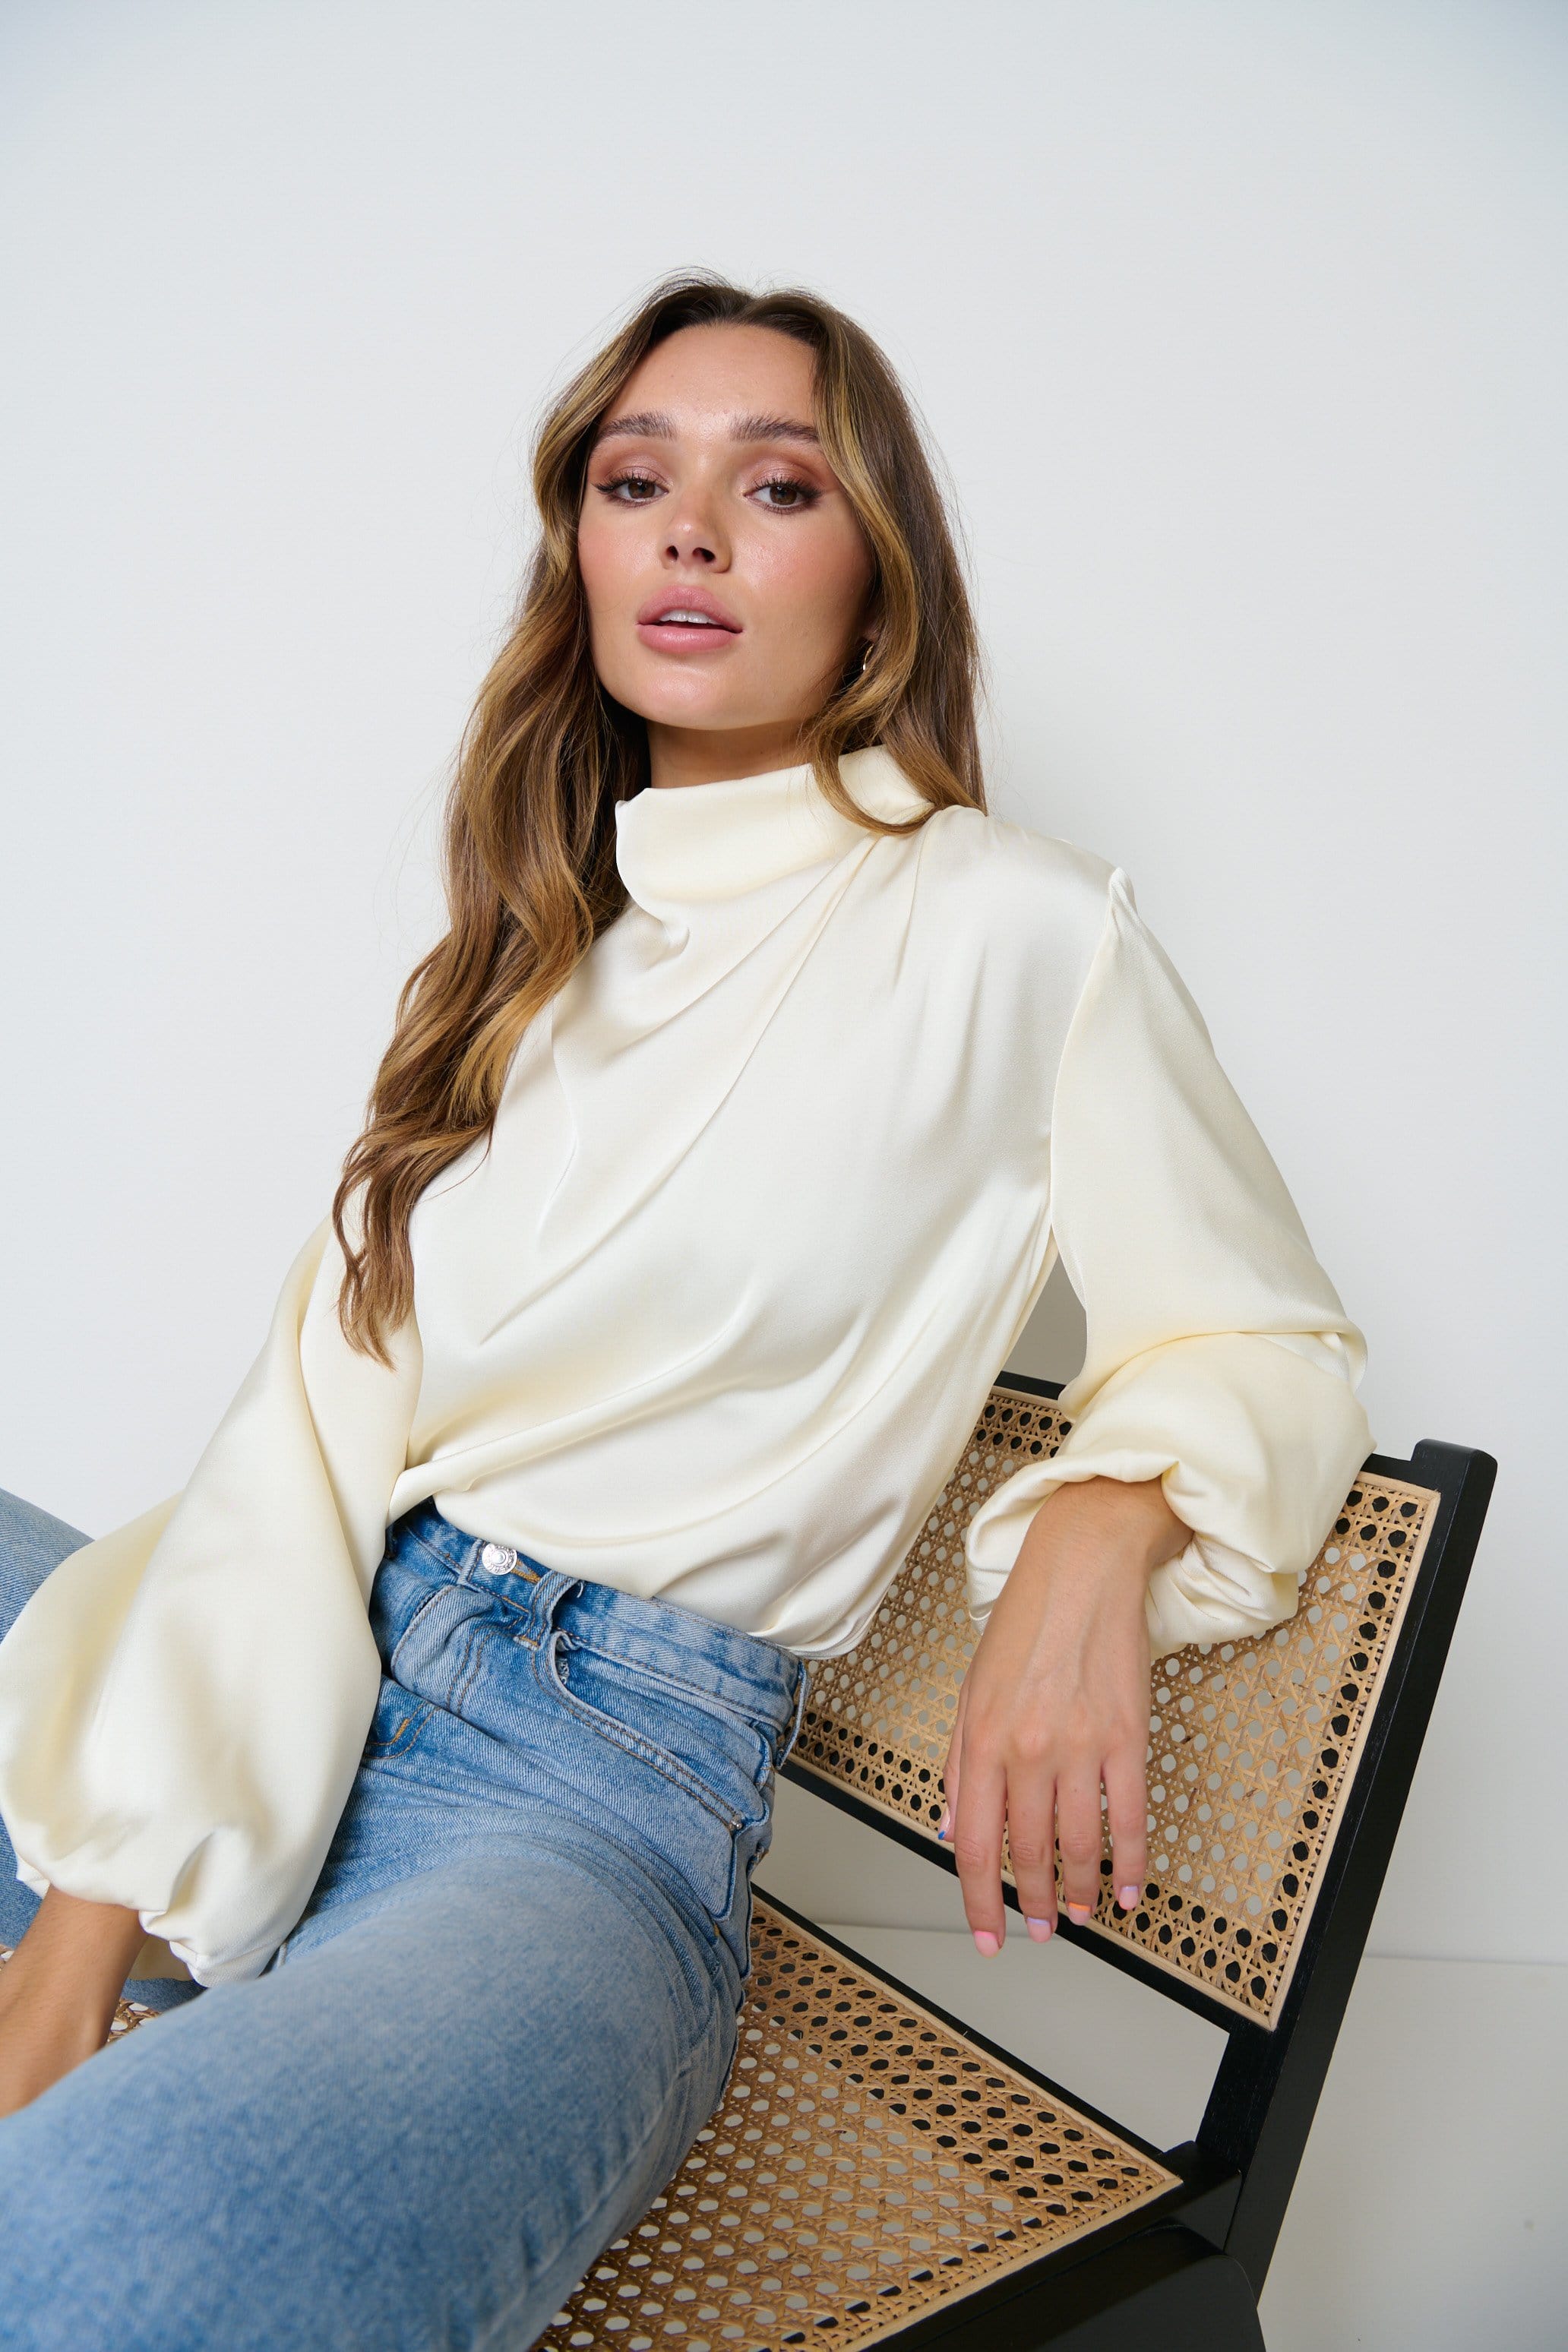 Tate Cowl Neck Pleated Blouse - Oyster